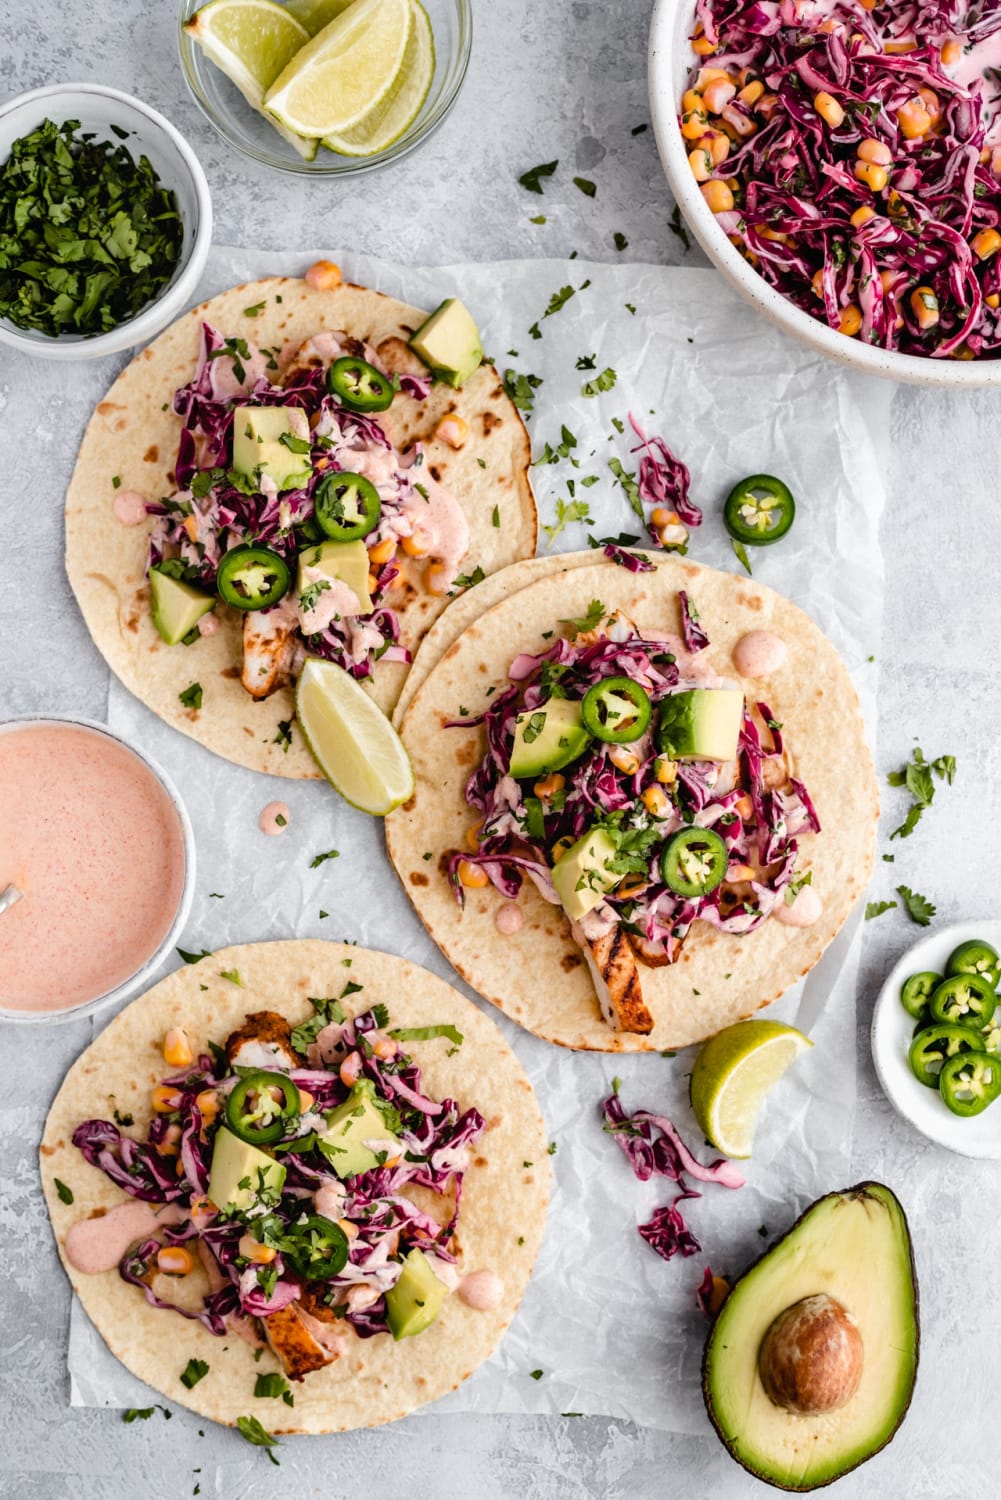 These grilled chicken tacos are simple to make and always impress!